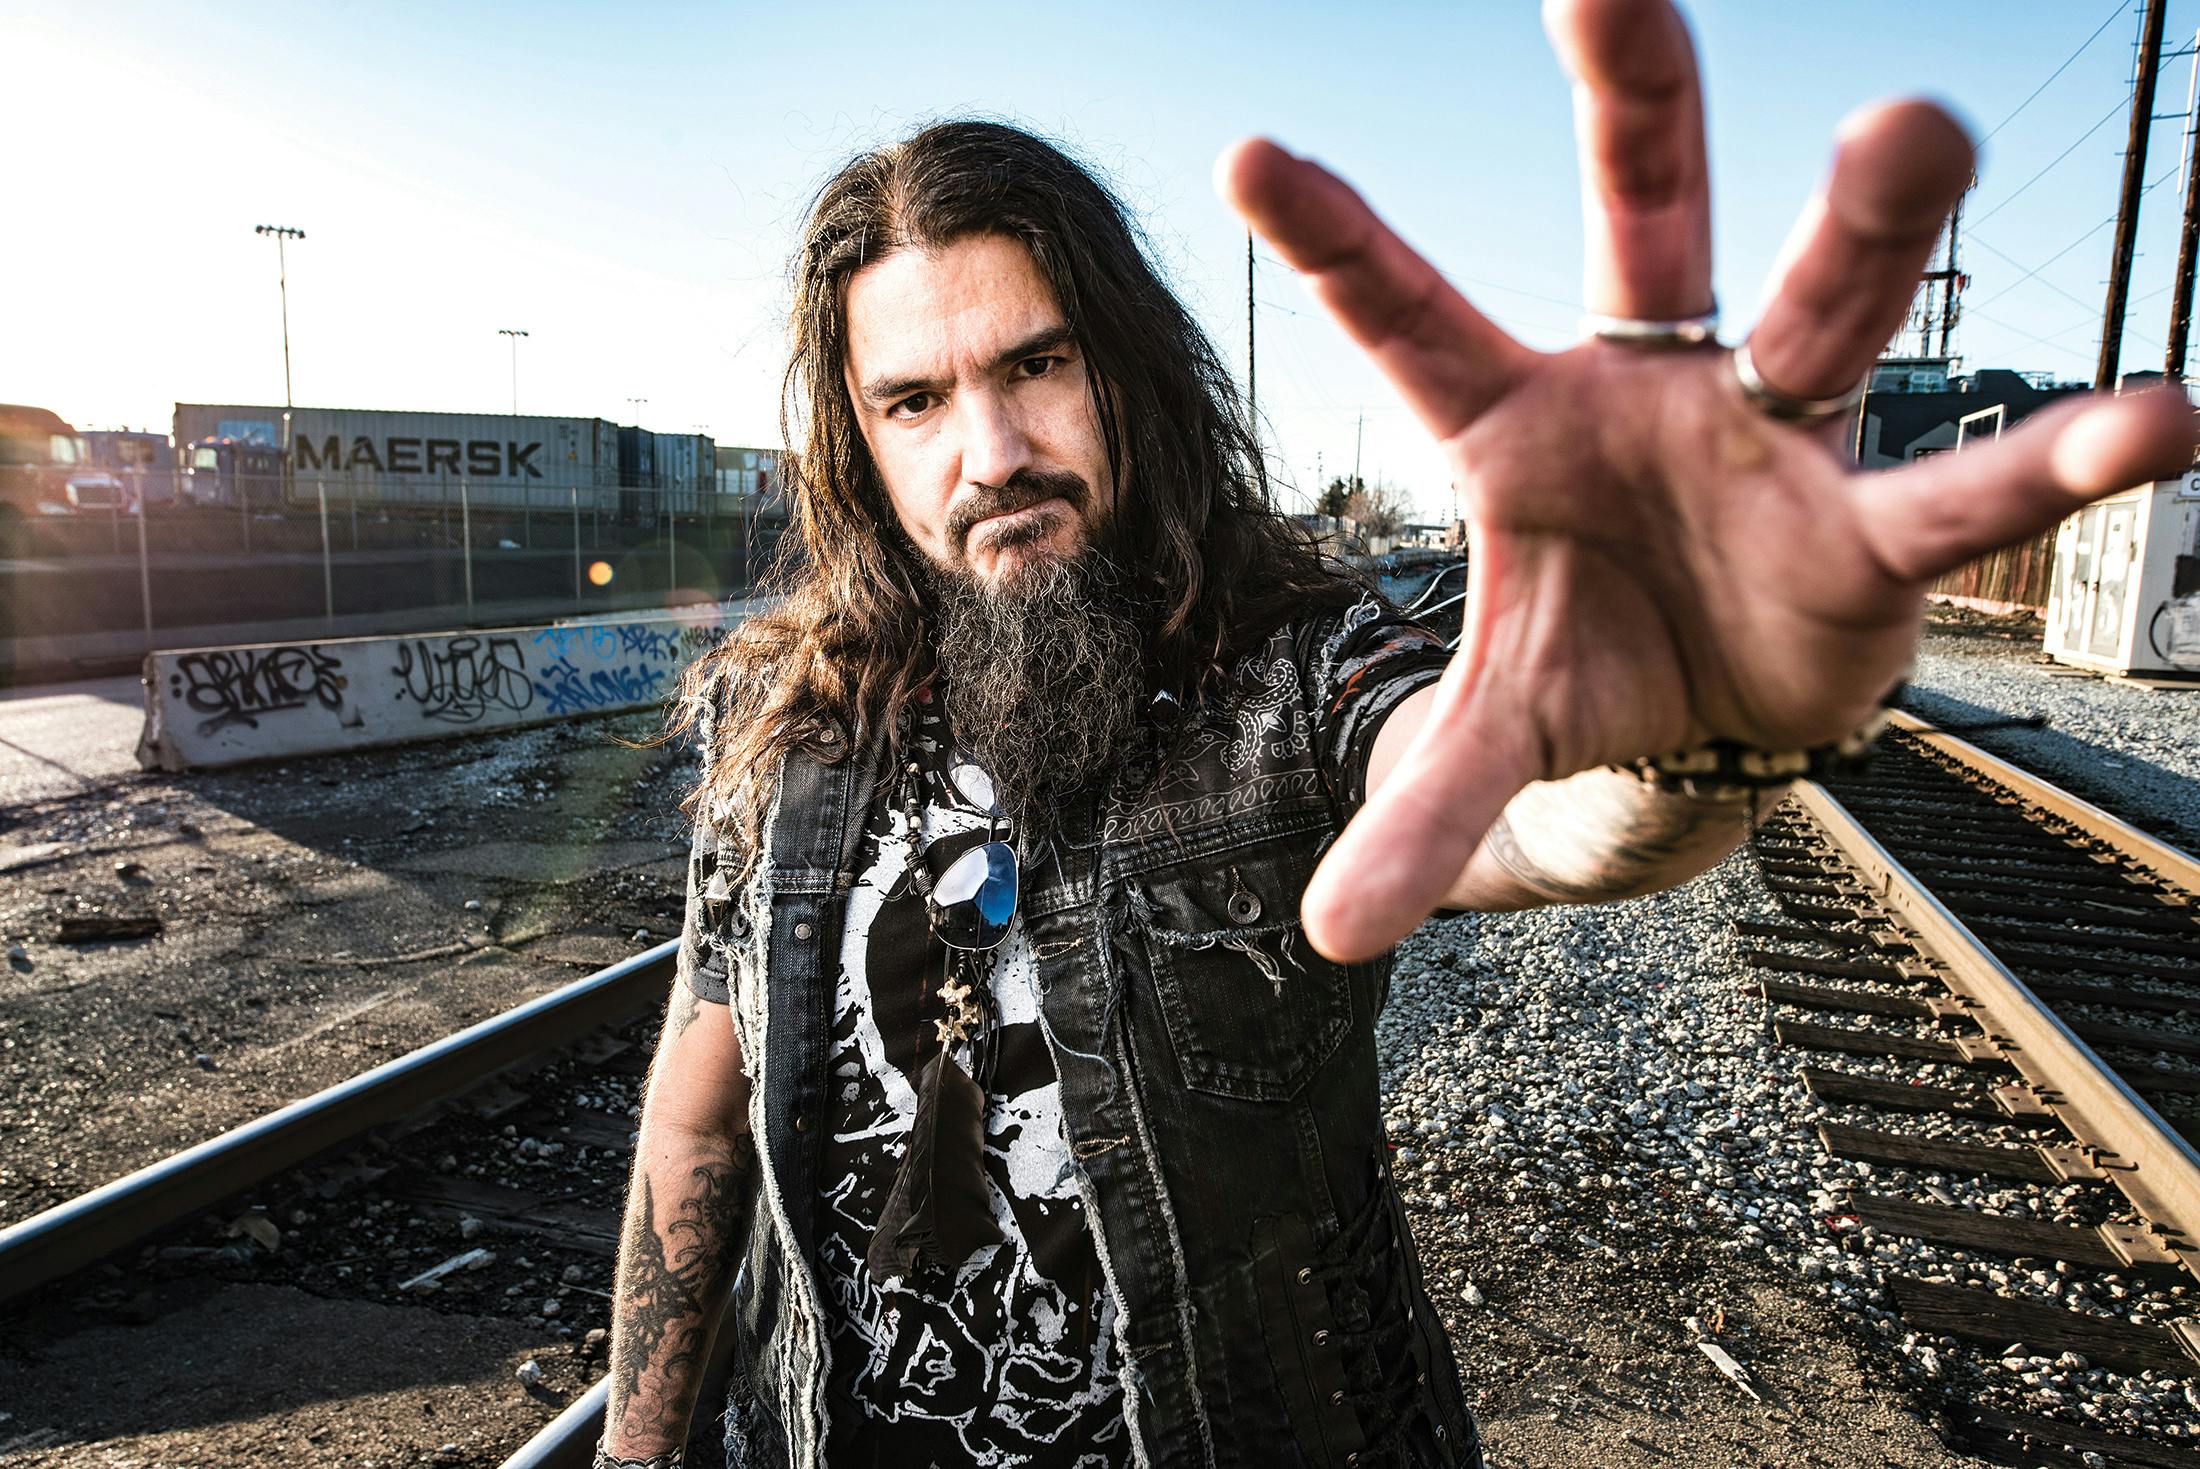 What Comes Next For Machine Head?